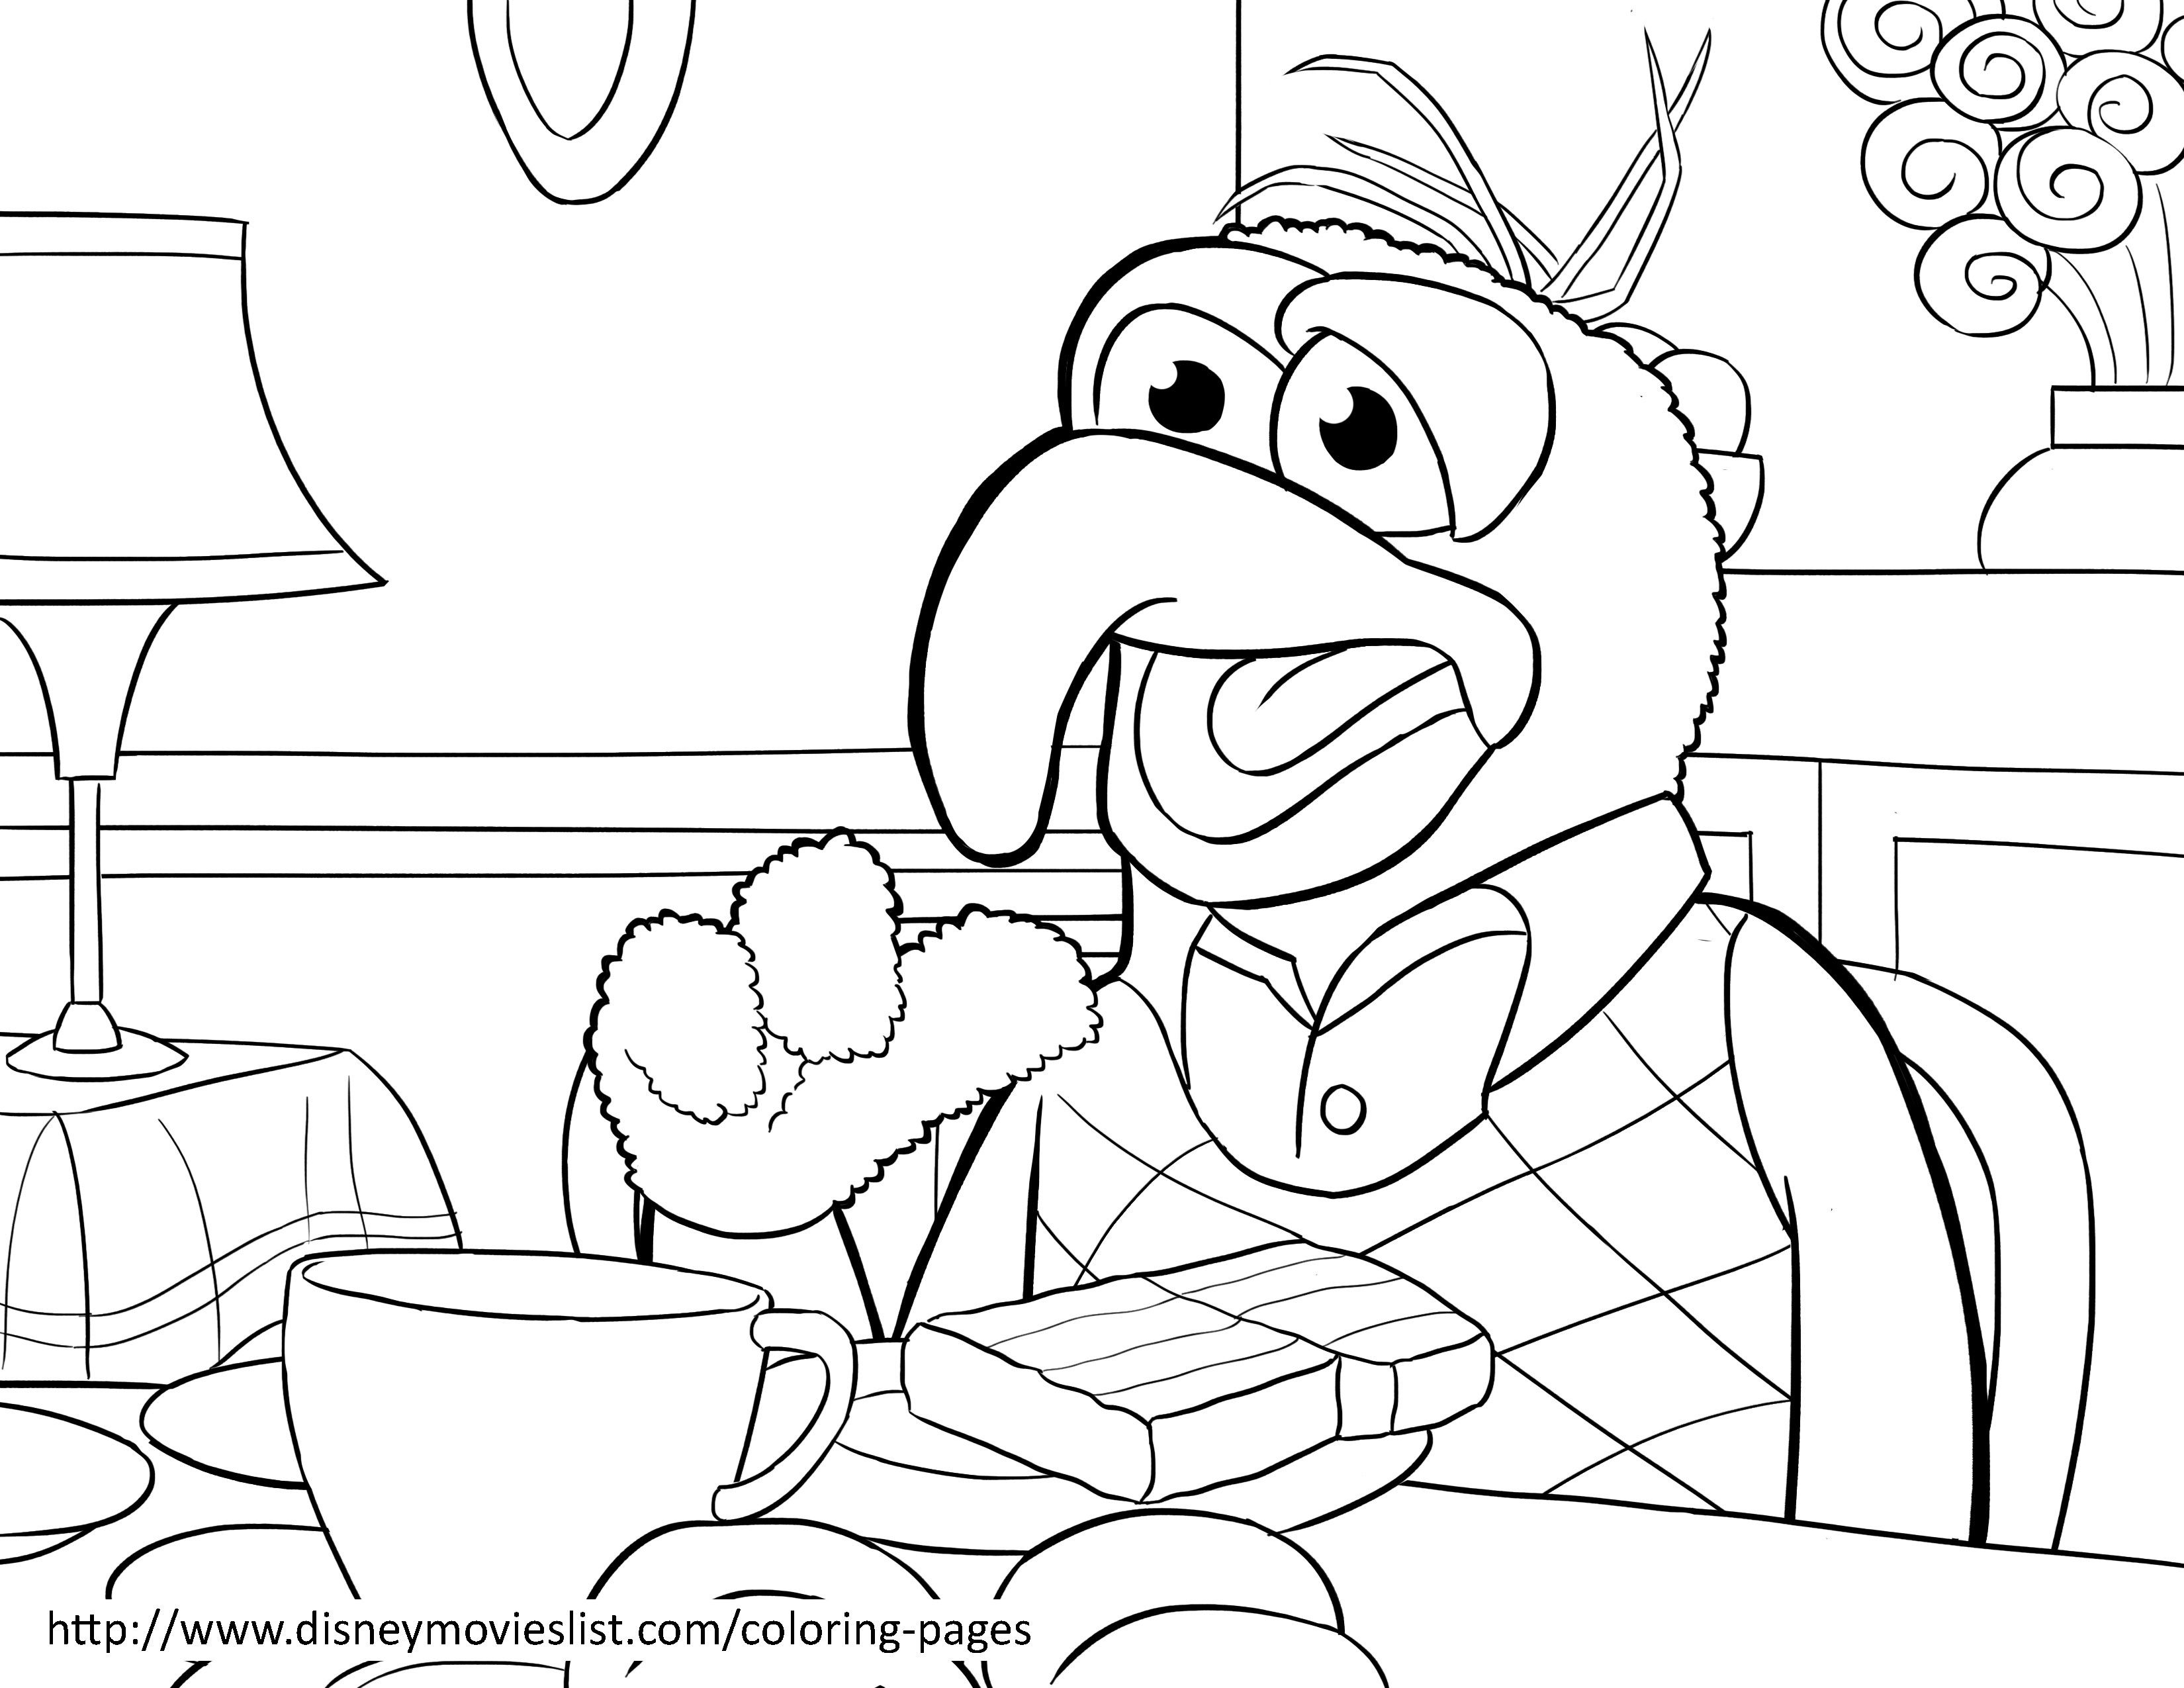 Muppets Coloring Pages. and more of these coloring pages muppet ...